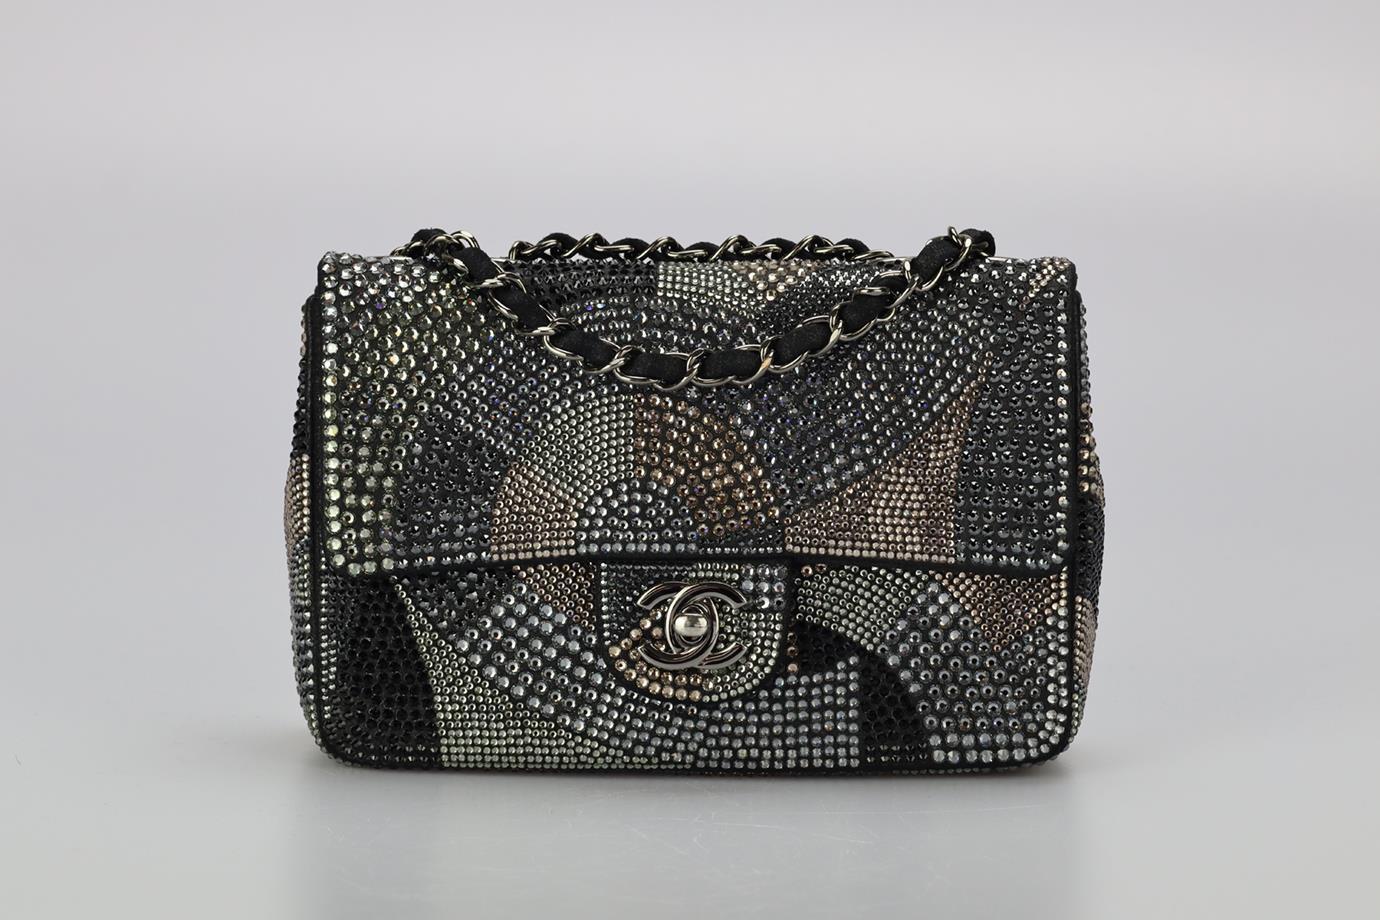 Chanel 2015 Classic Mini Rectangle Flap Strass Embellished Shoulder Bag. Grey and silver. Twist lock fastening - Front. Comes with - authenticity card. Does not come with - dustbag or box. Height: 5.1 in. Width: 8 in. Depth: 2.2 in. Handle drop: